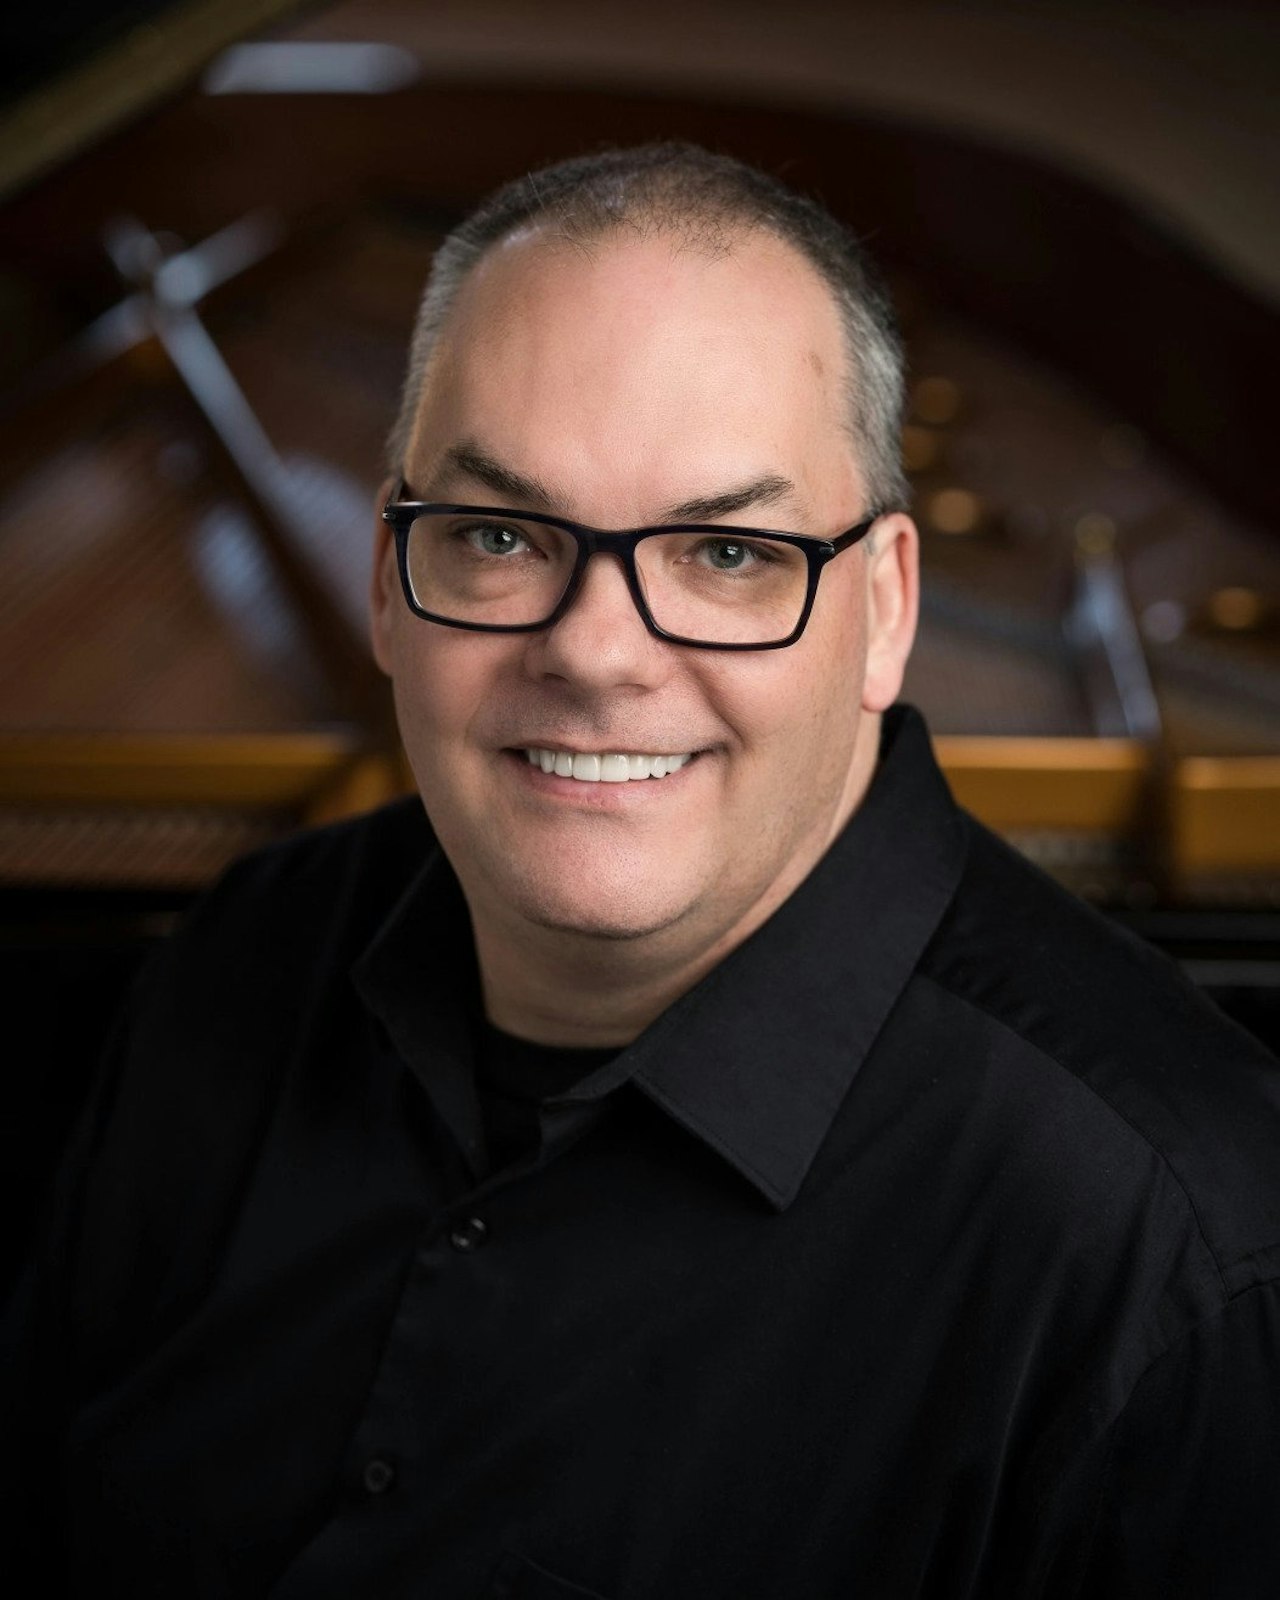 St. Louis-based composer Orin Johnson's original hymn, "True Presence Now Among Us," which won the Archdiocese of Detroit's hymn competition for best overall composition, was inspired by St. Thomas Aquinas' ancient Latin text, "Pange Lingua Gloriosi."